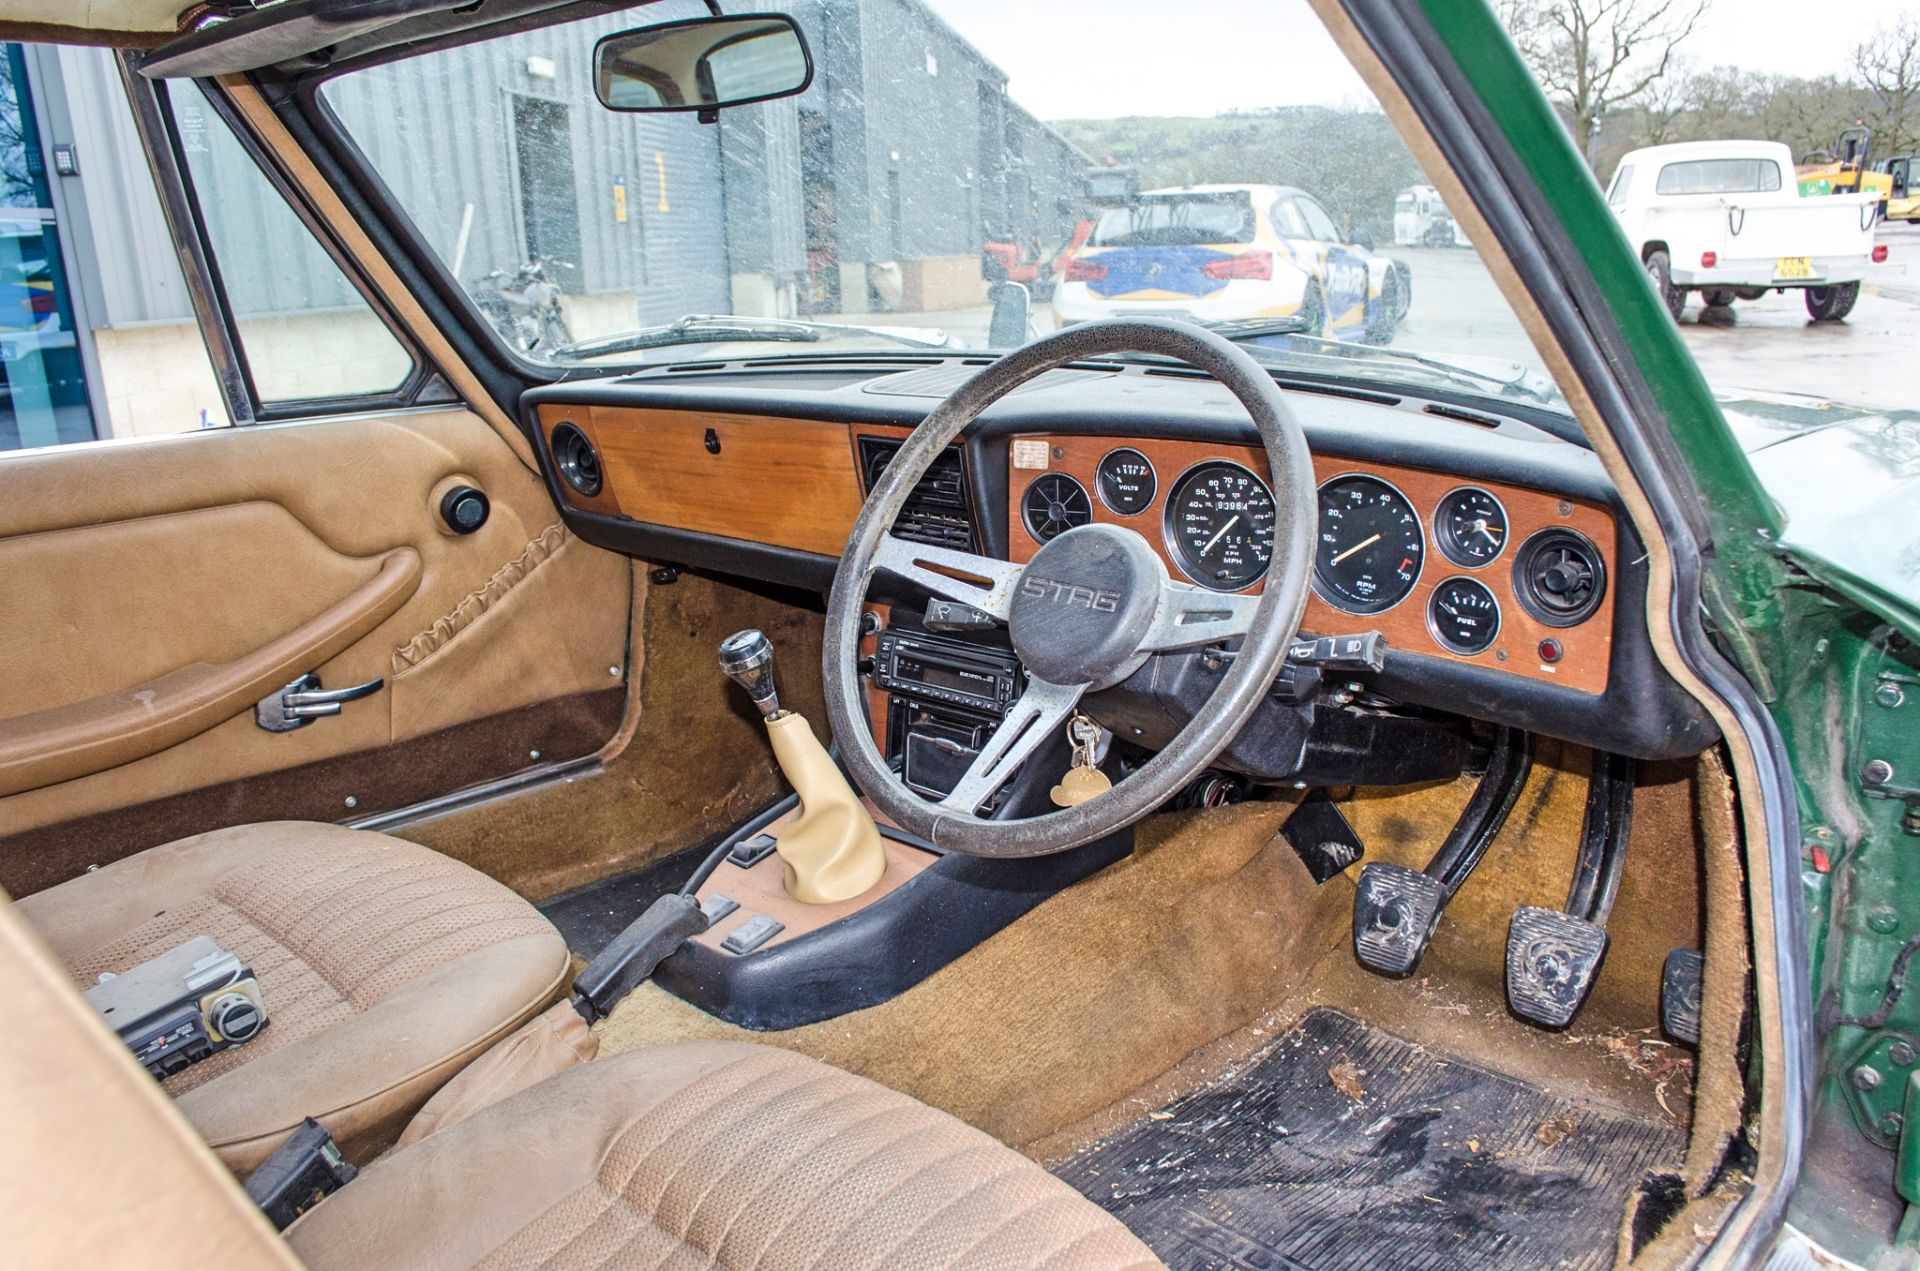 1978 Triumph Stag 3 litre manual 2 door convertible Barn Find - Image 29 of 57